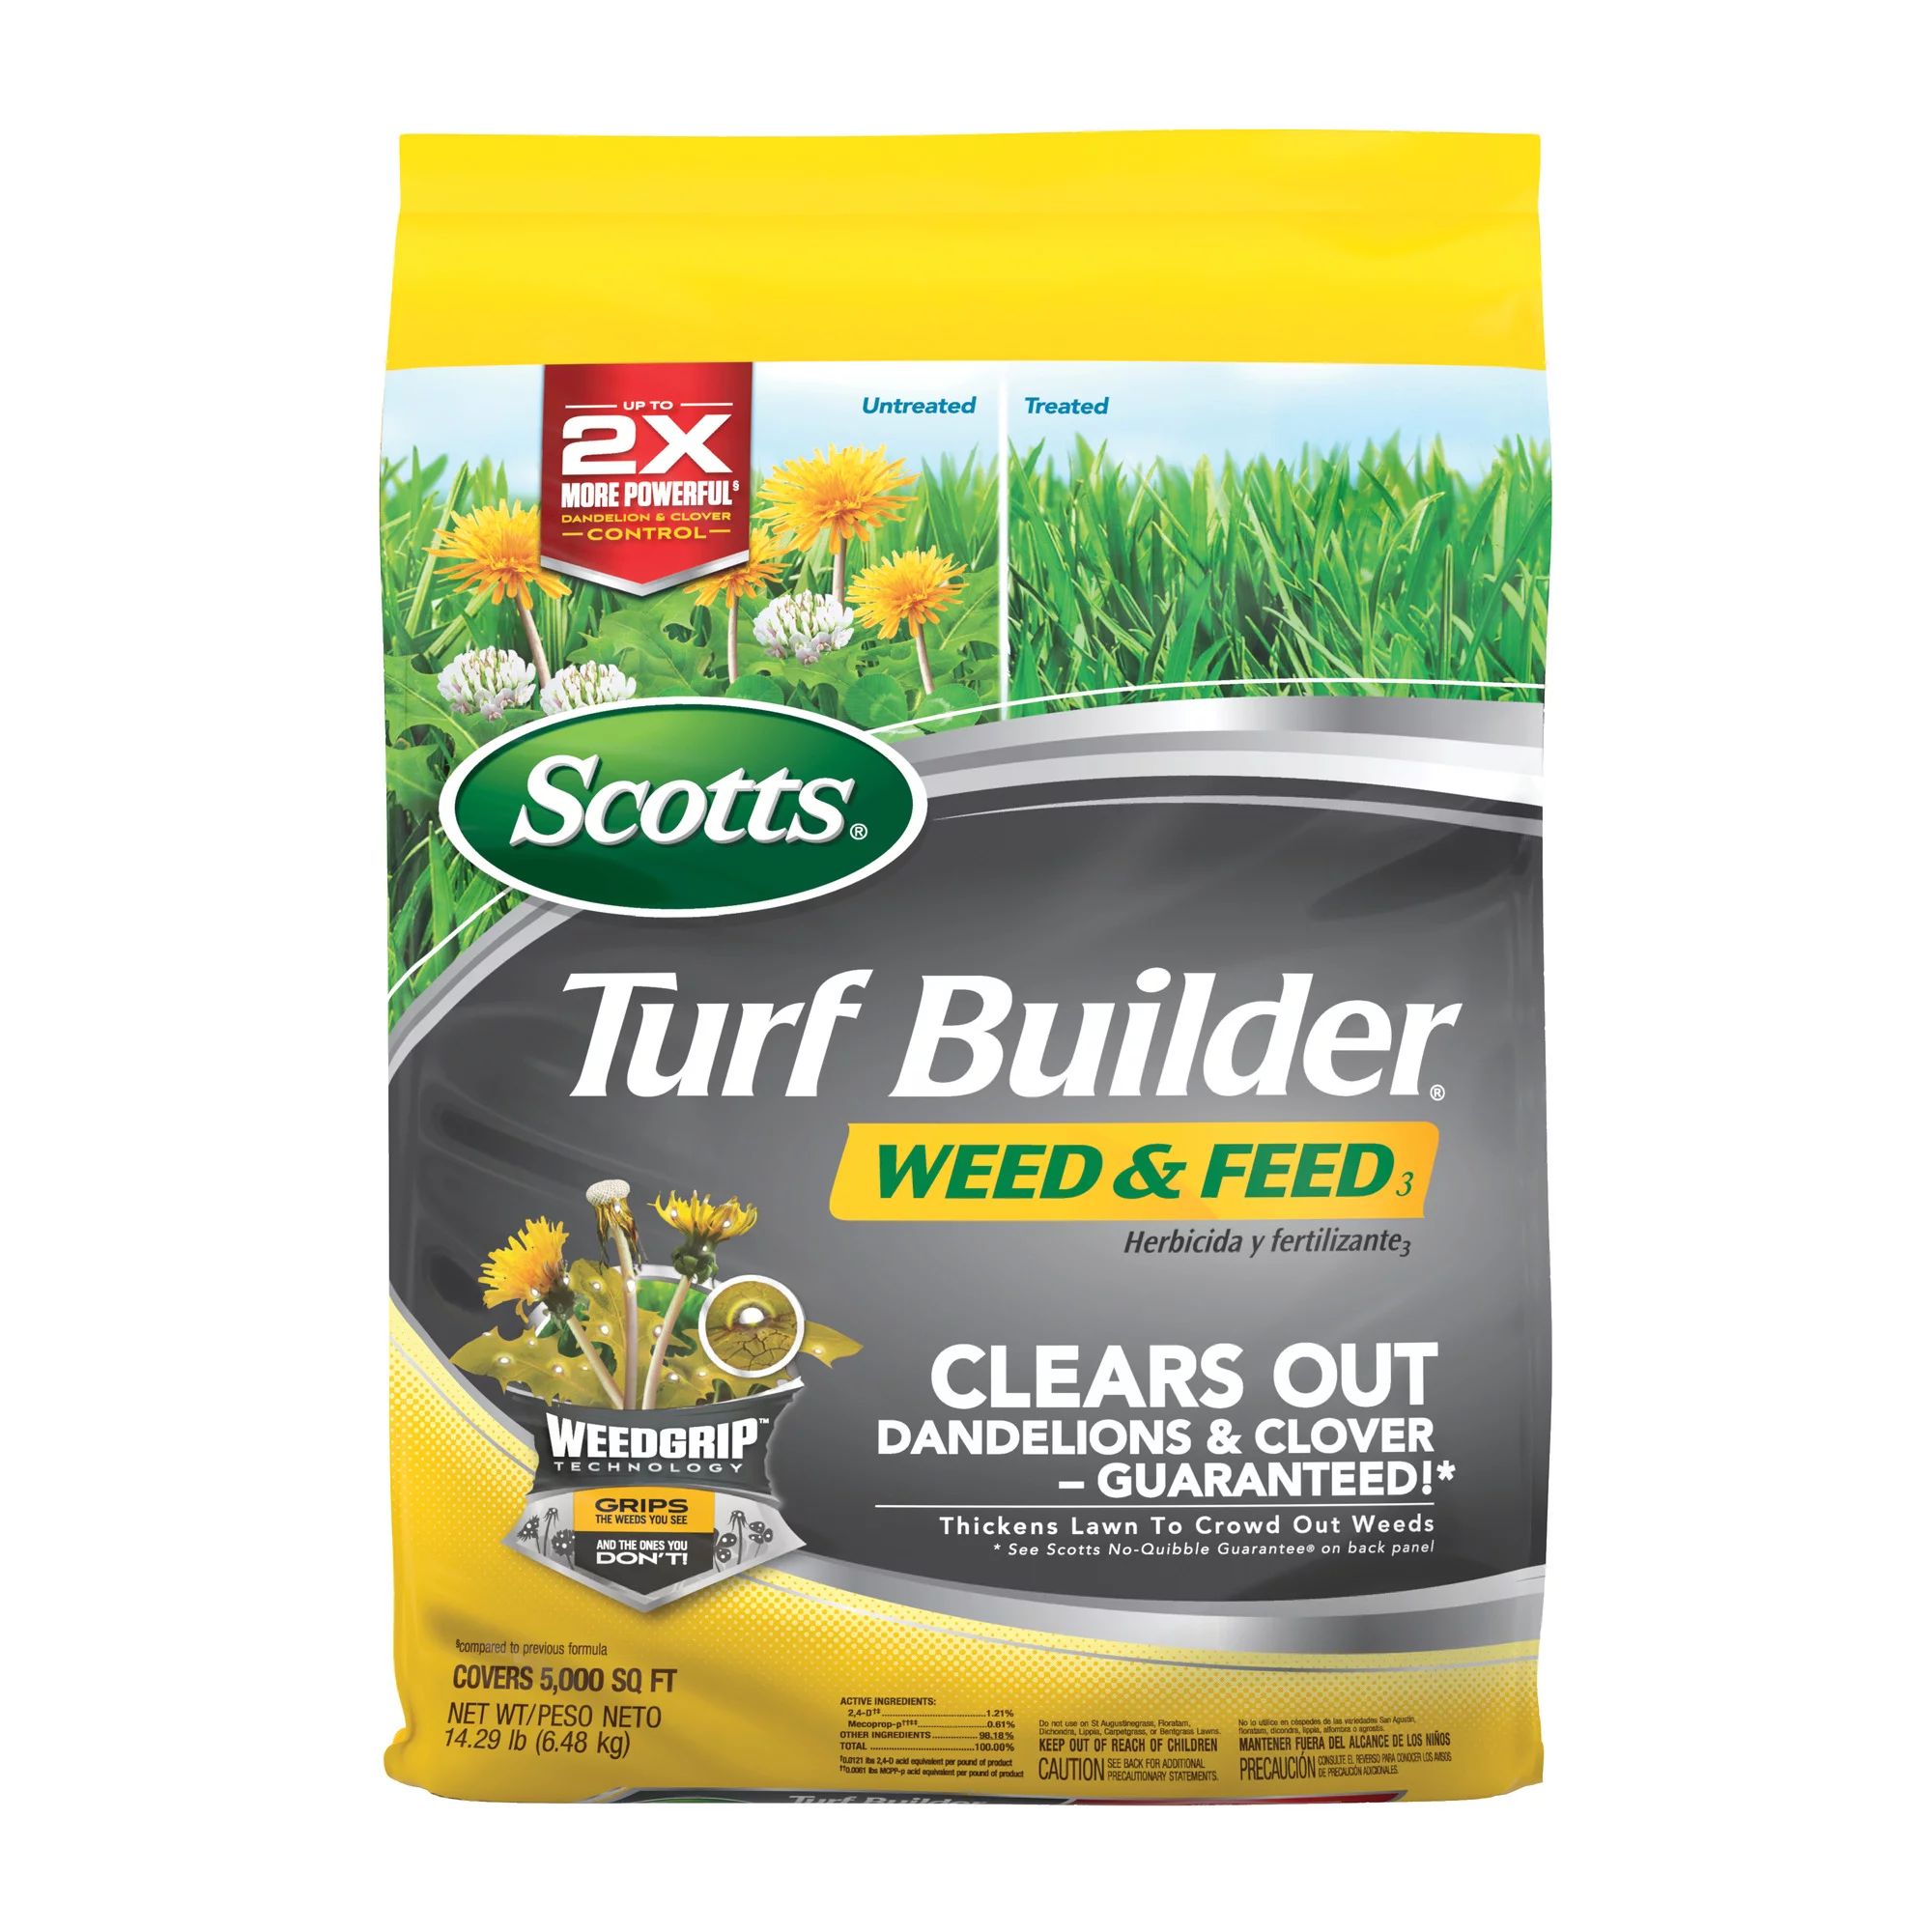 Scotts Turf Builder Weed & Feed 3, 14.29 lbs., up to 5,000 sq. ft. | Walmart (US)